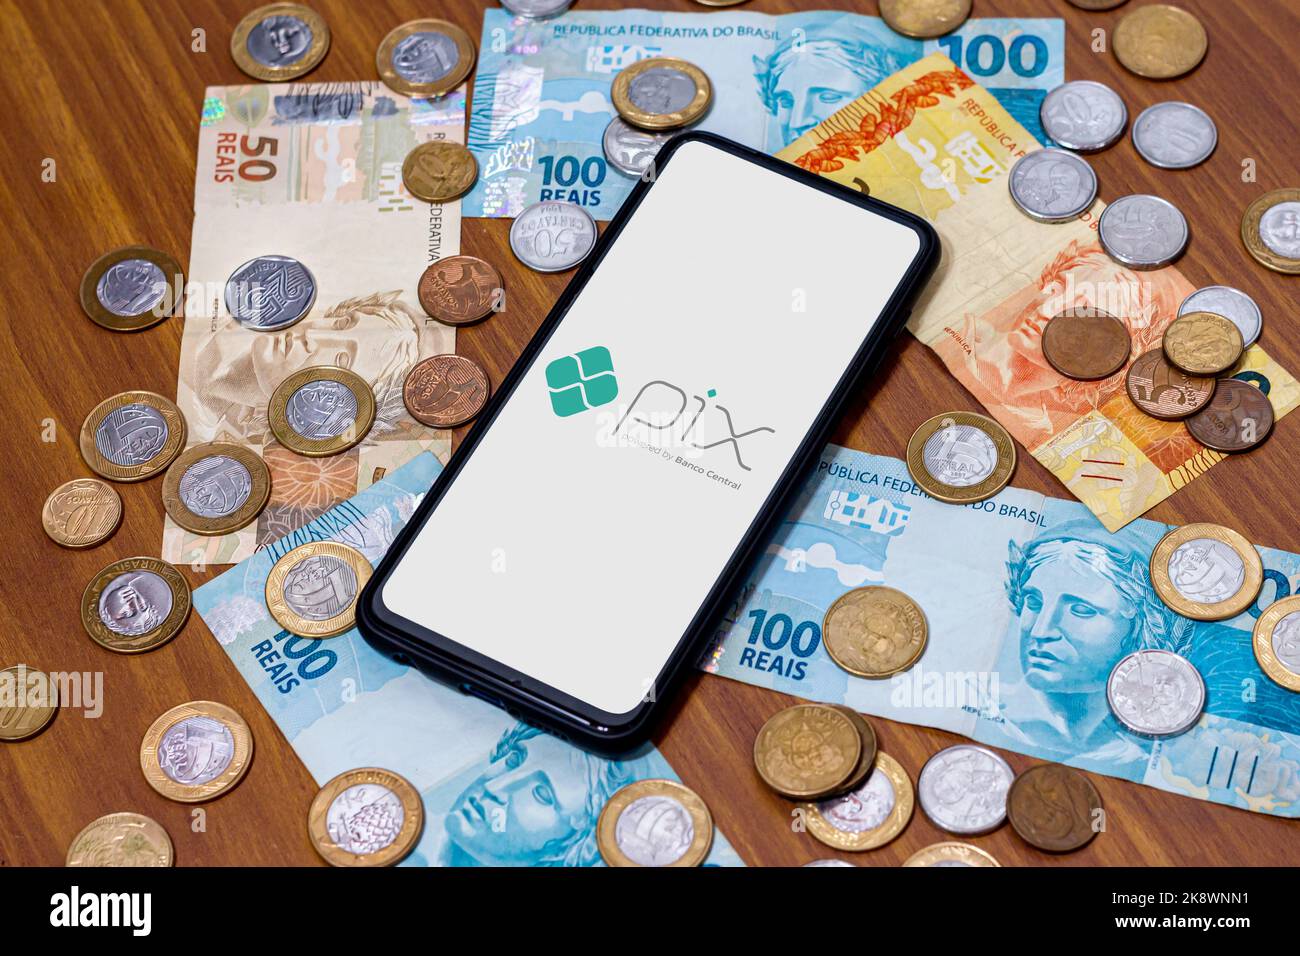 Sao Paulo, Brazil. MARCH 8, 2022: Pix logo on smartphone screen with multiple coins around. Pix is the new payment and transfer system of the Brazilia Stock Photo